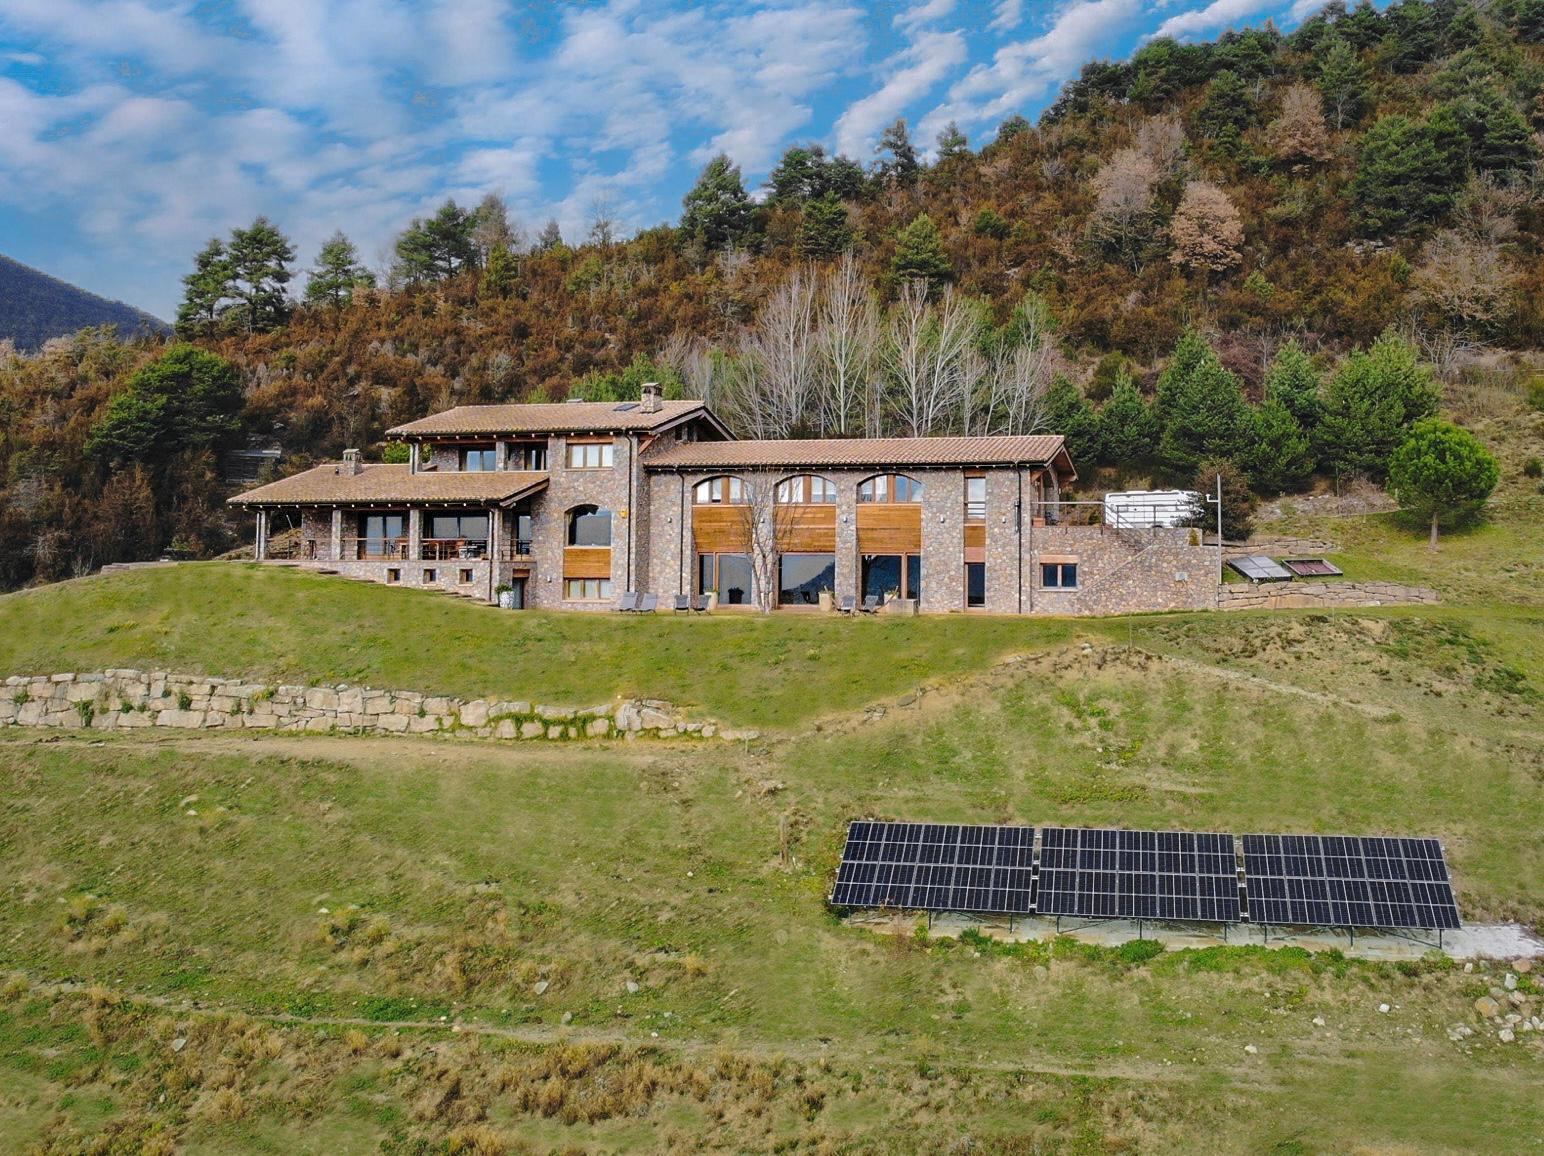 off-grid photovoltaic installations